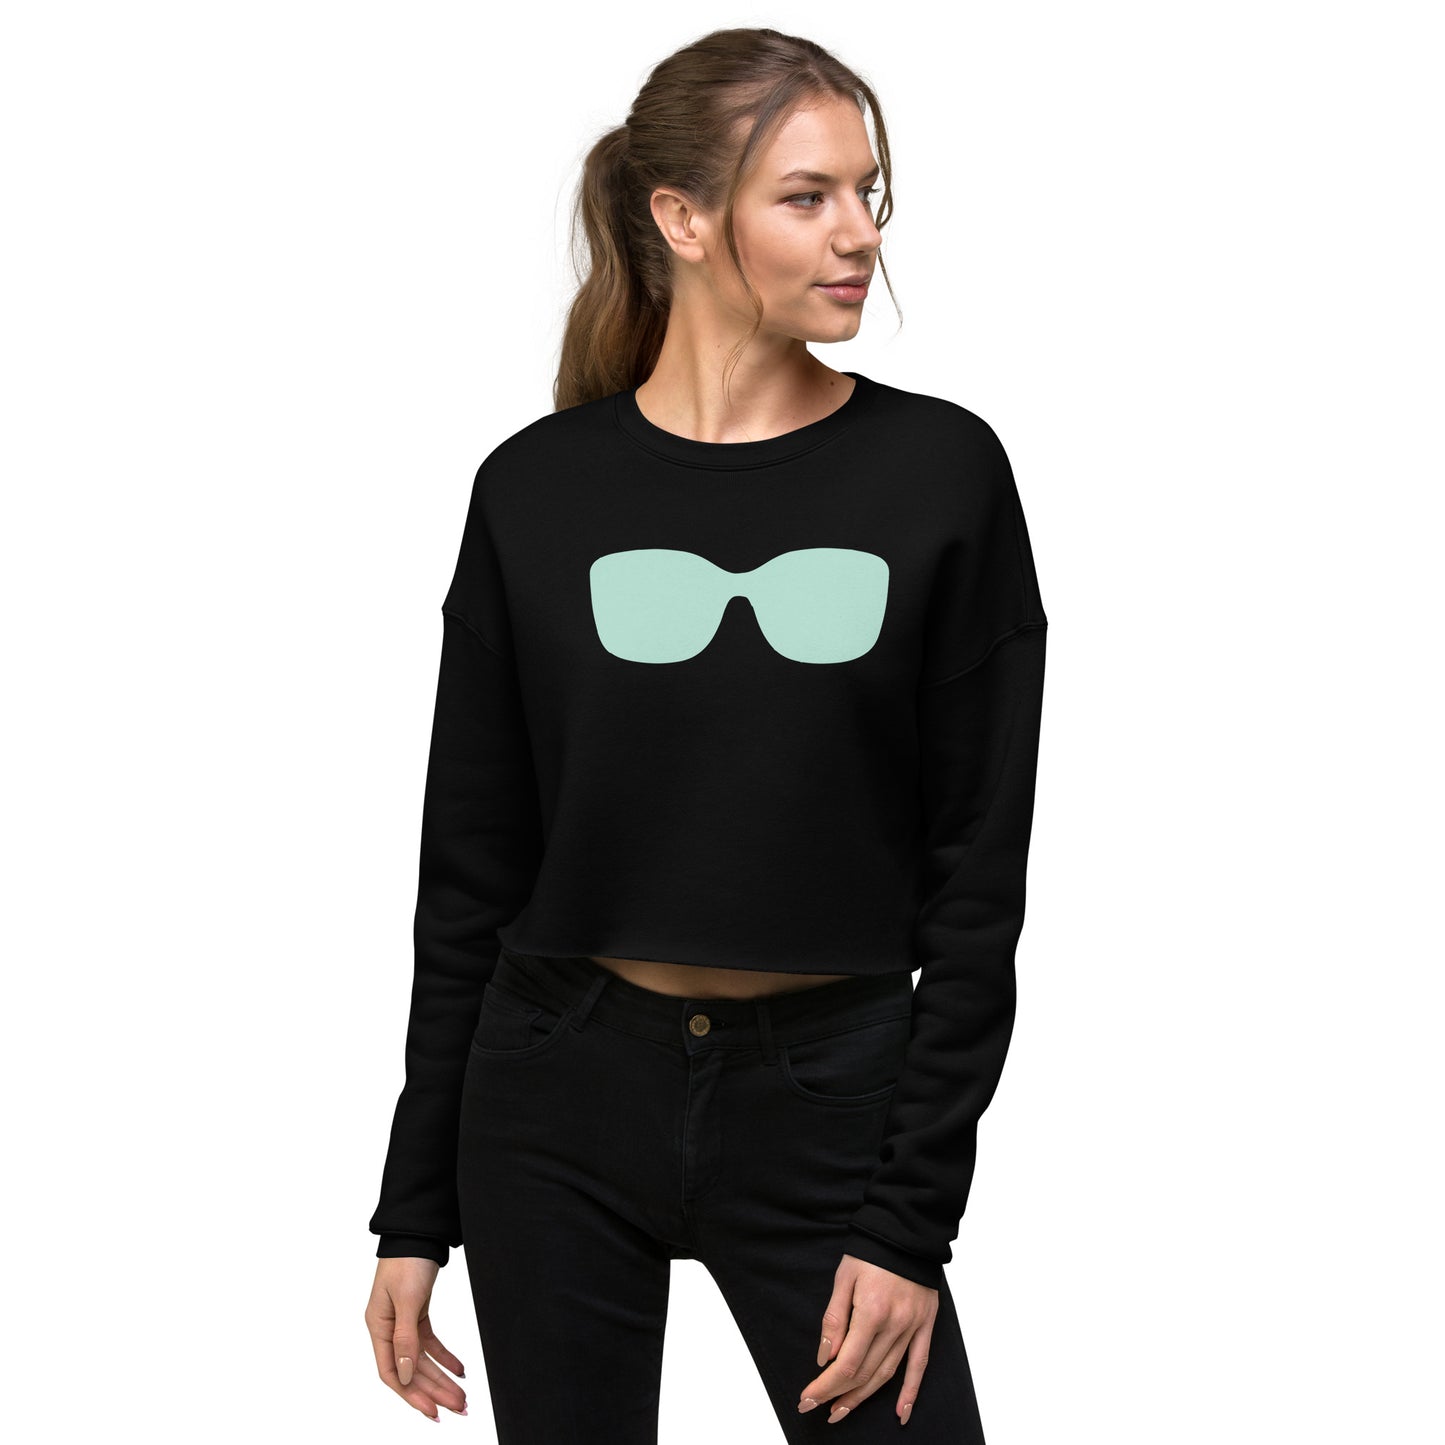 It's Giving Shades Cropped Sweater